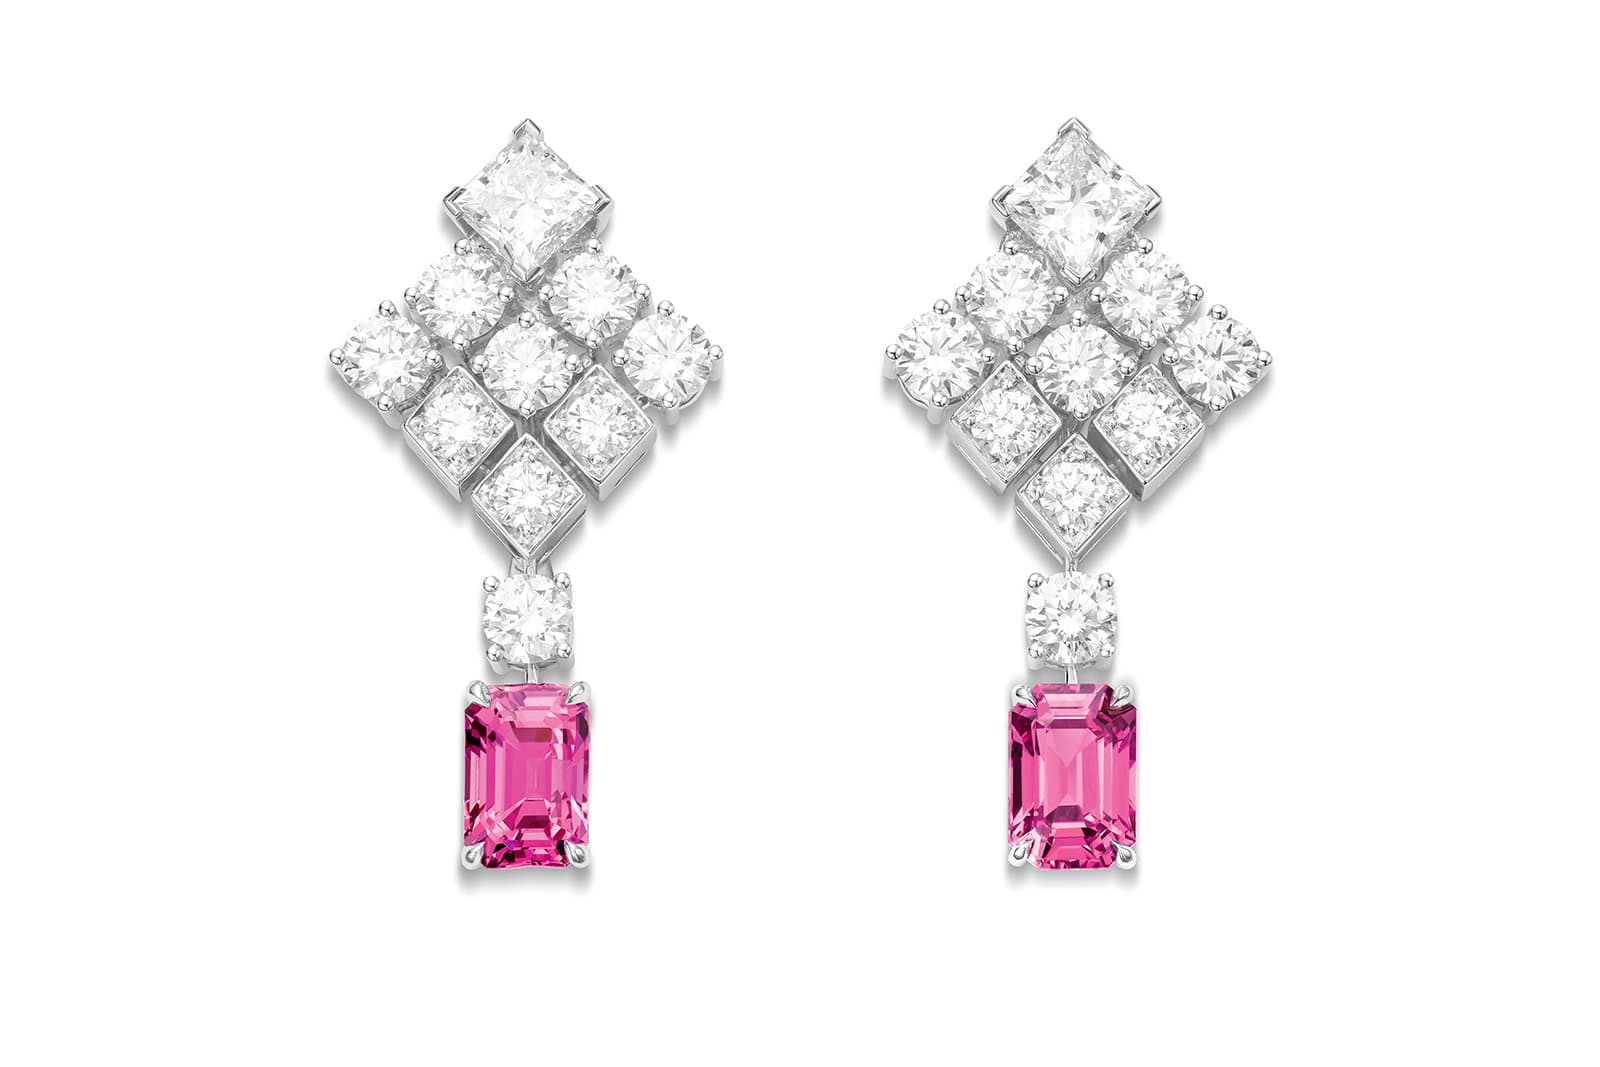 Piaget 2022 Extraordinary Lights High Jewellery Exhibition in